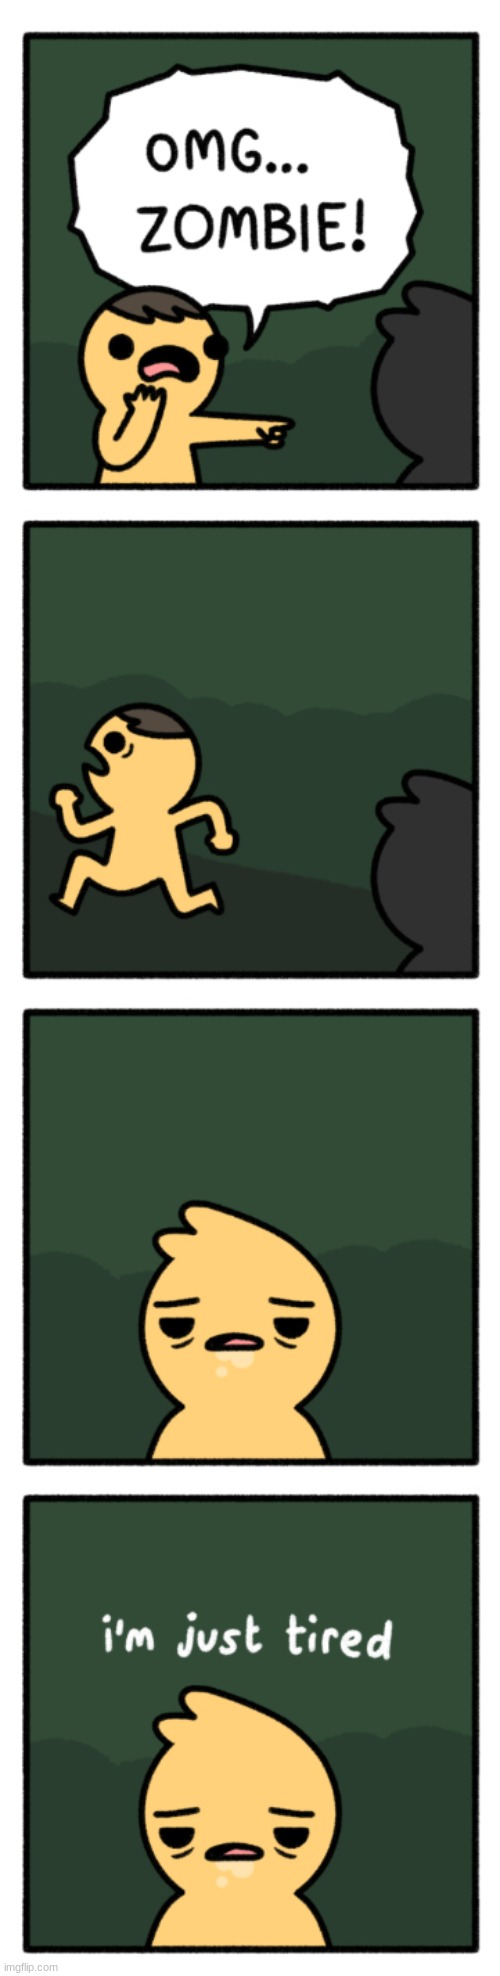 im tired | image tagged in comics/cartoons,zombies,tired | made w/ Imgflip meme maker